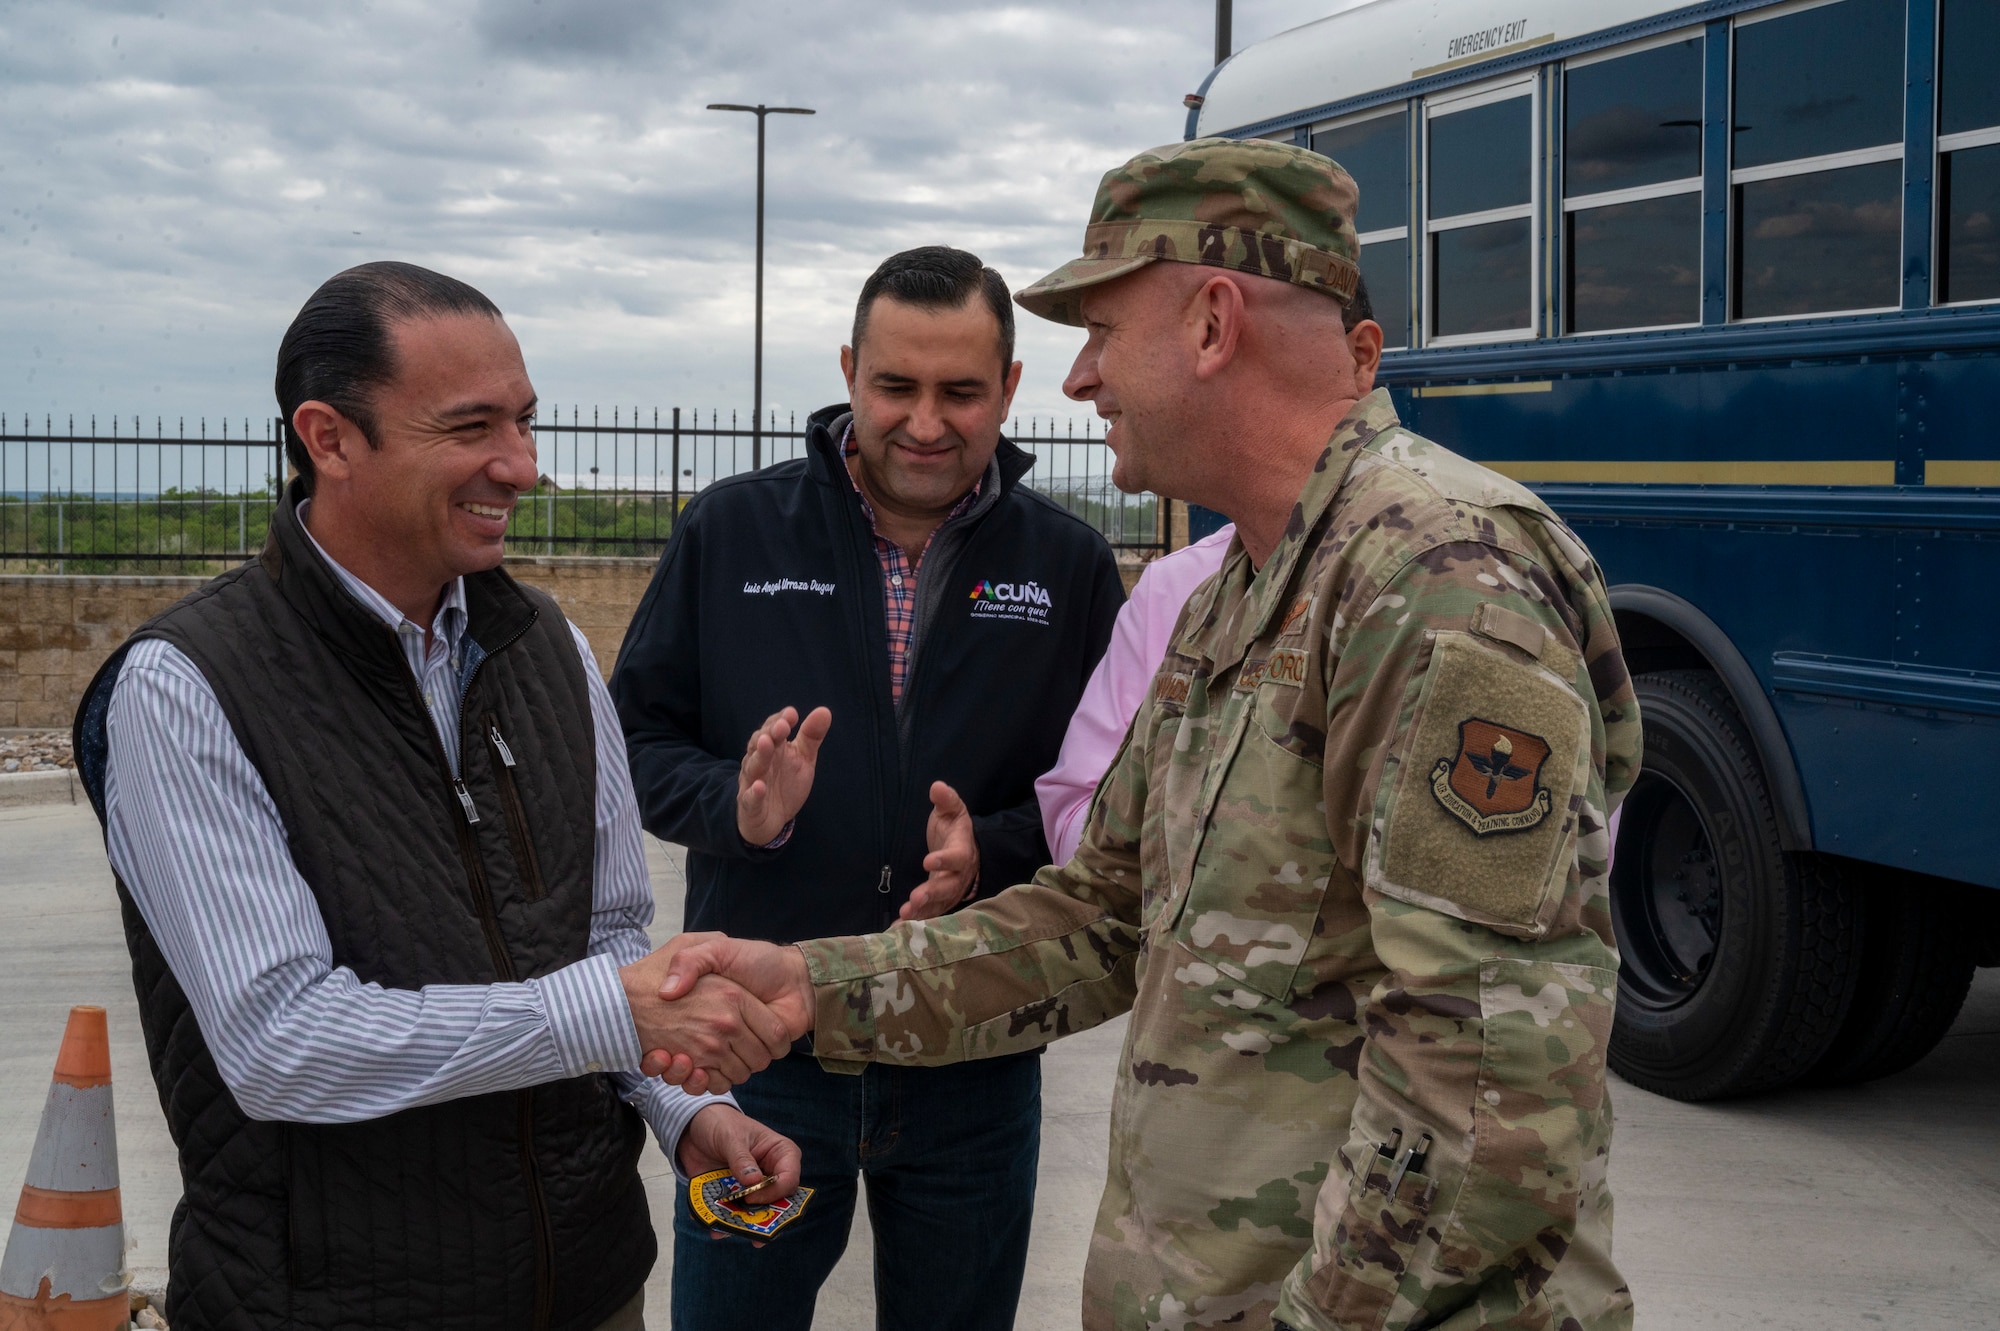 Emilio de Hoyos (left), Mayor of Ciudad Acuna, Mexico, and U.S. Air Force Col. Kevin Davidson (right), 47th Flying Training Wing commander, shake hands at the end of the tour of Laughlin Air Force Base, Texas, Nov. 1, 2022. Laughlin’s mission is to develop U.S. Air Force pilots and the base relies on support from the local community to make that mission a success. Familiarization tours cultivate understating of the wing’s mission and help forge lasting partnerships in the community.  (U.S. Air Force photo by Senior Airman Nicholas Larsen)